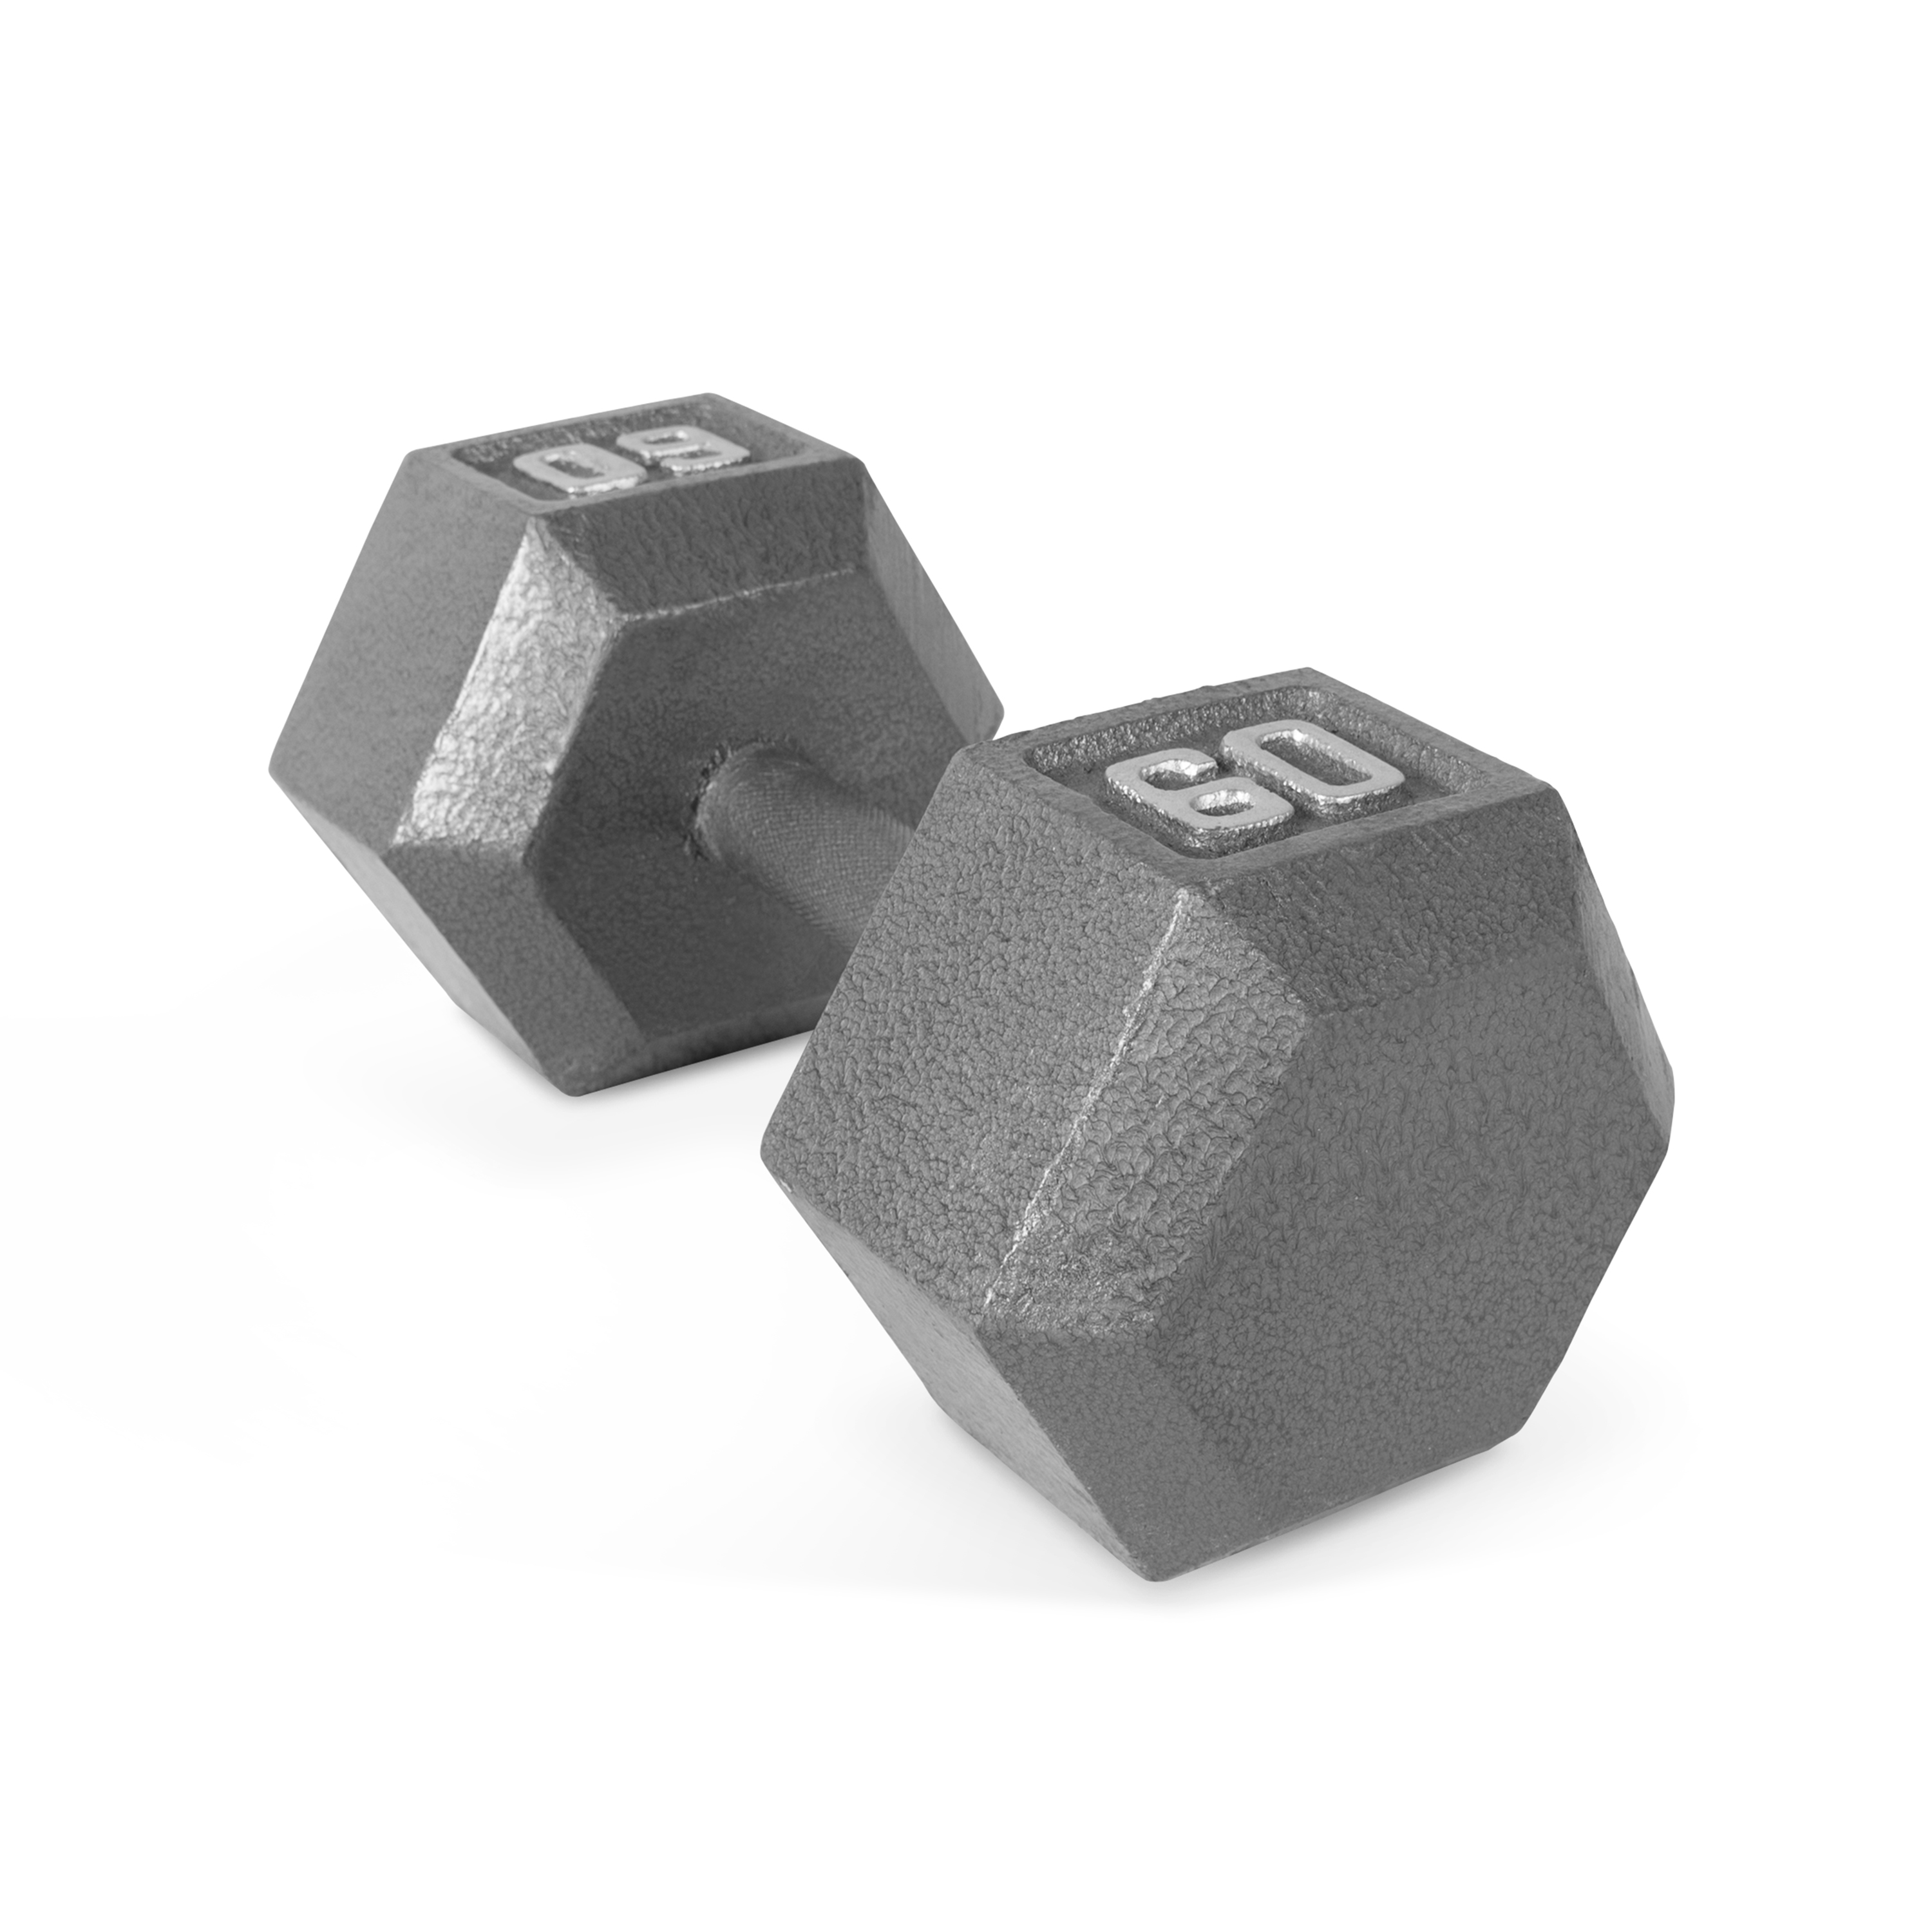 CAP Barbell 60lb Cast Iron Hex Dumbbell, Single - image 1 of 7